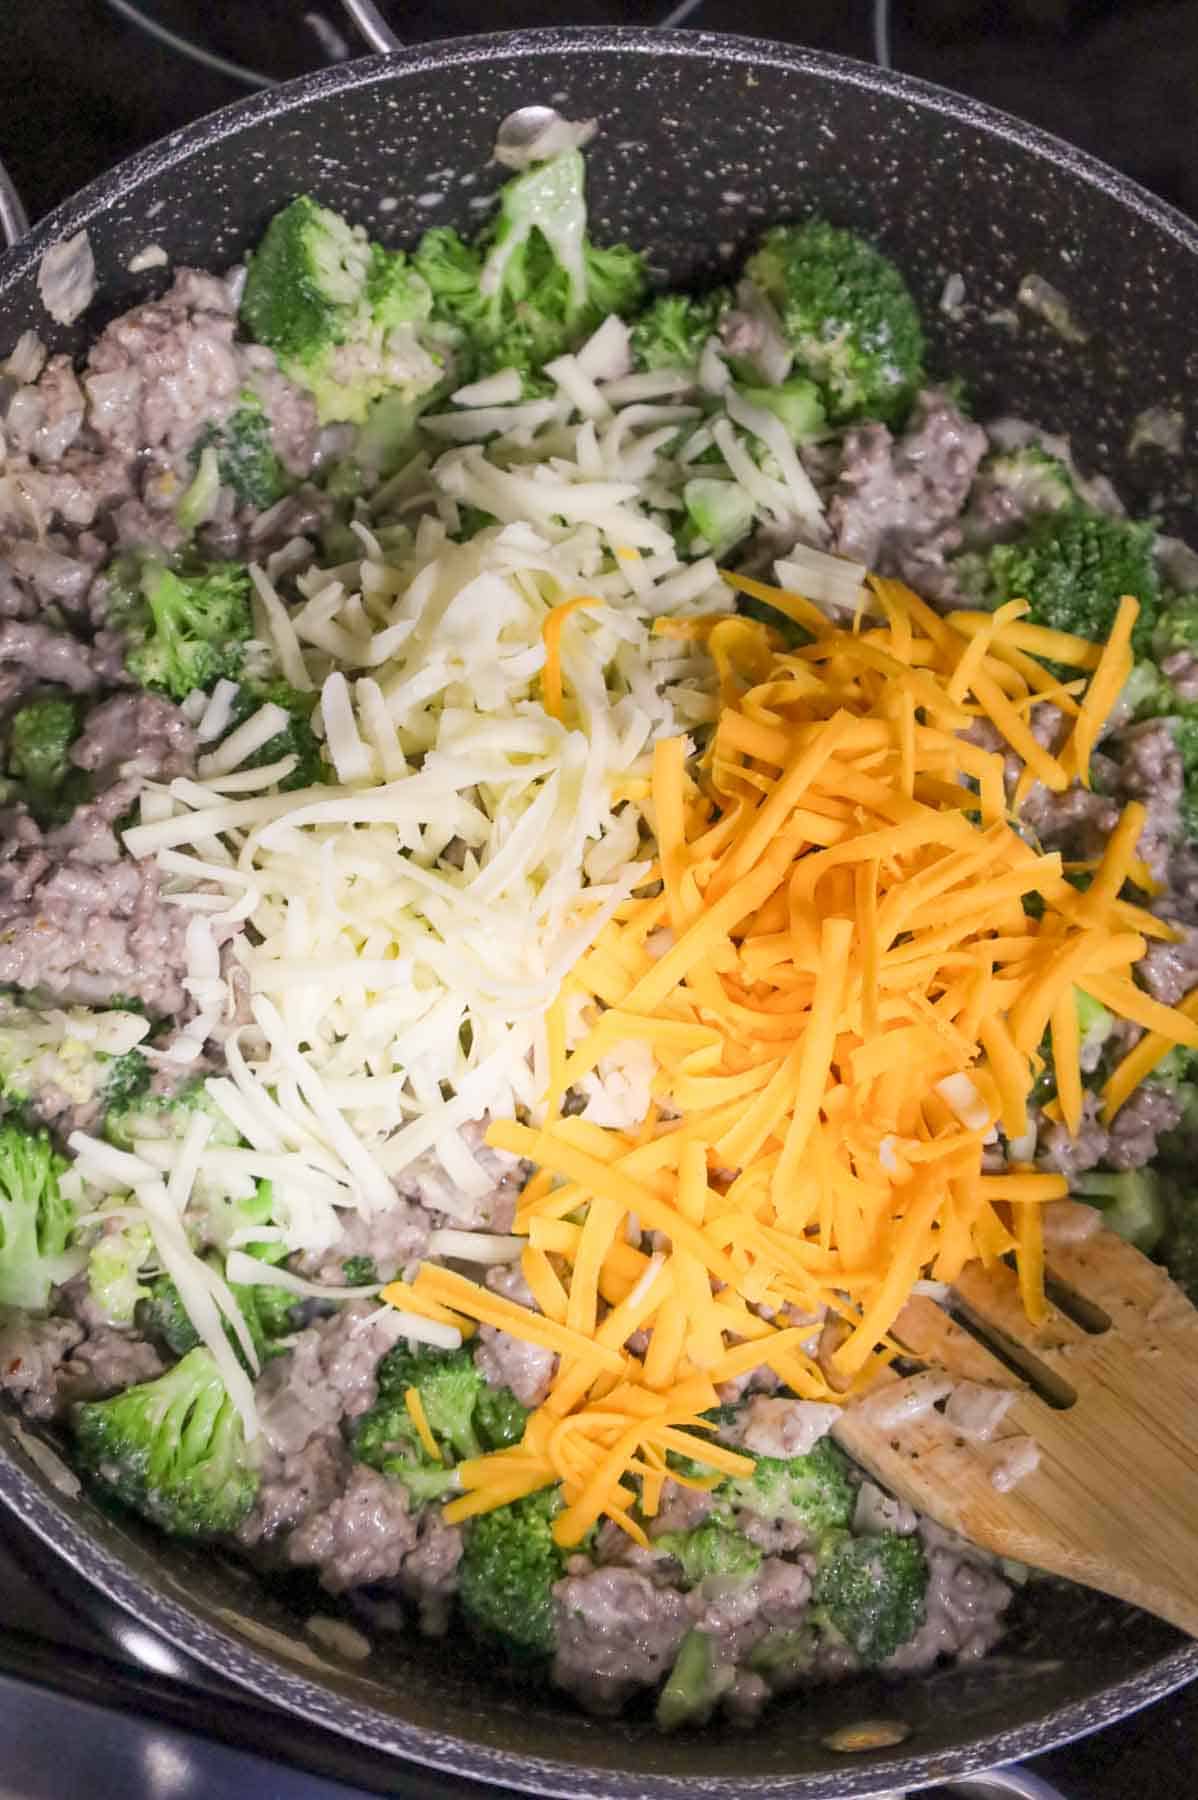 shredded mozzarella and shredded cheddar cheese on top of ground beef and broccoli mixture in a skillet